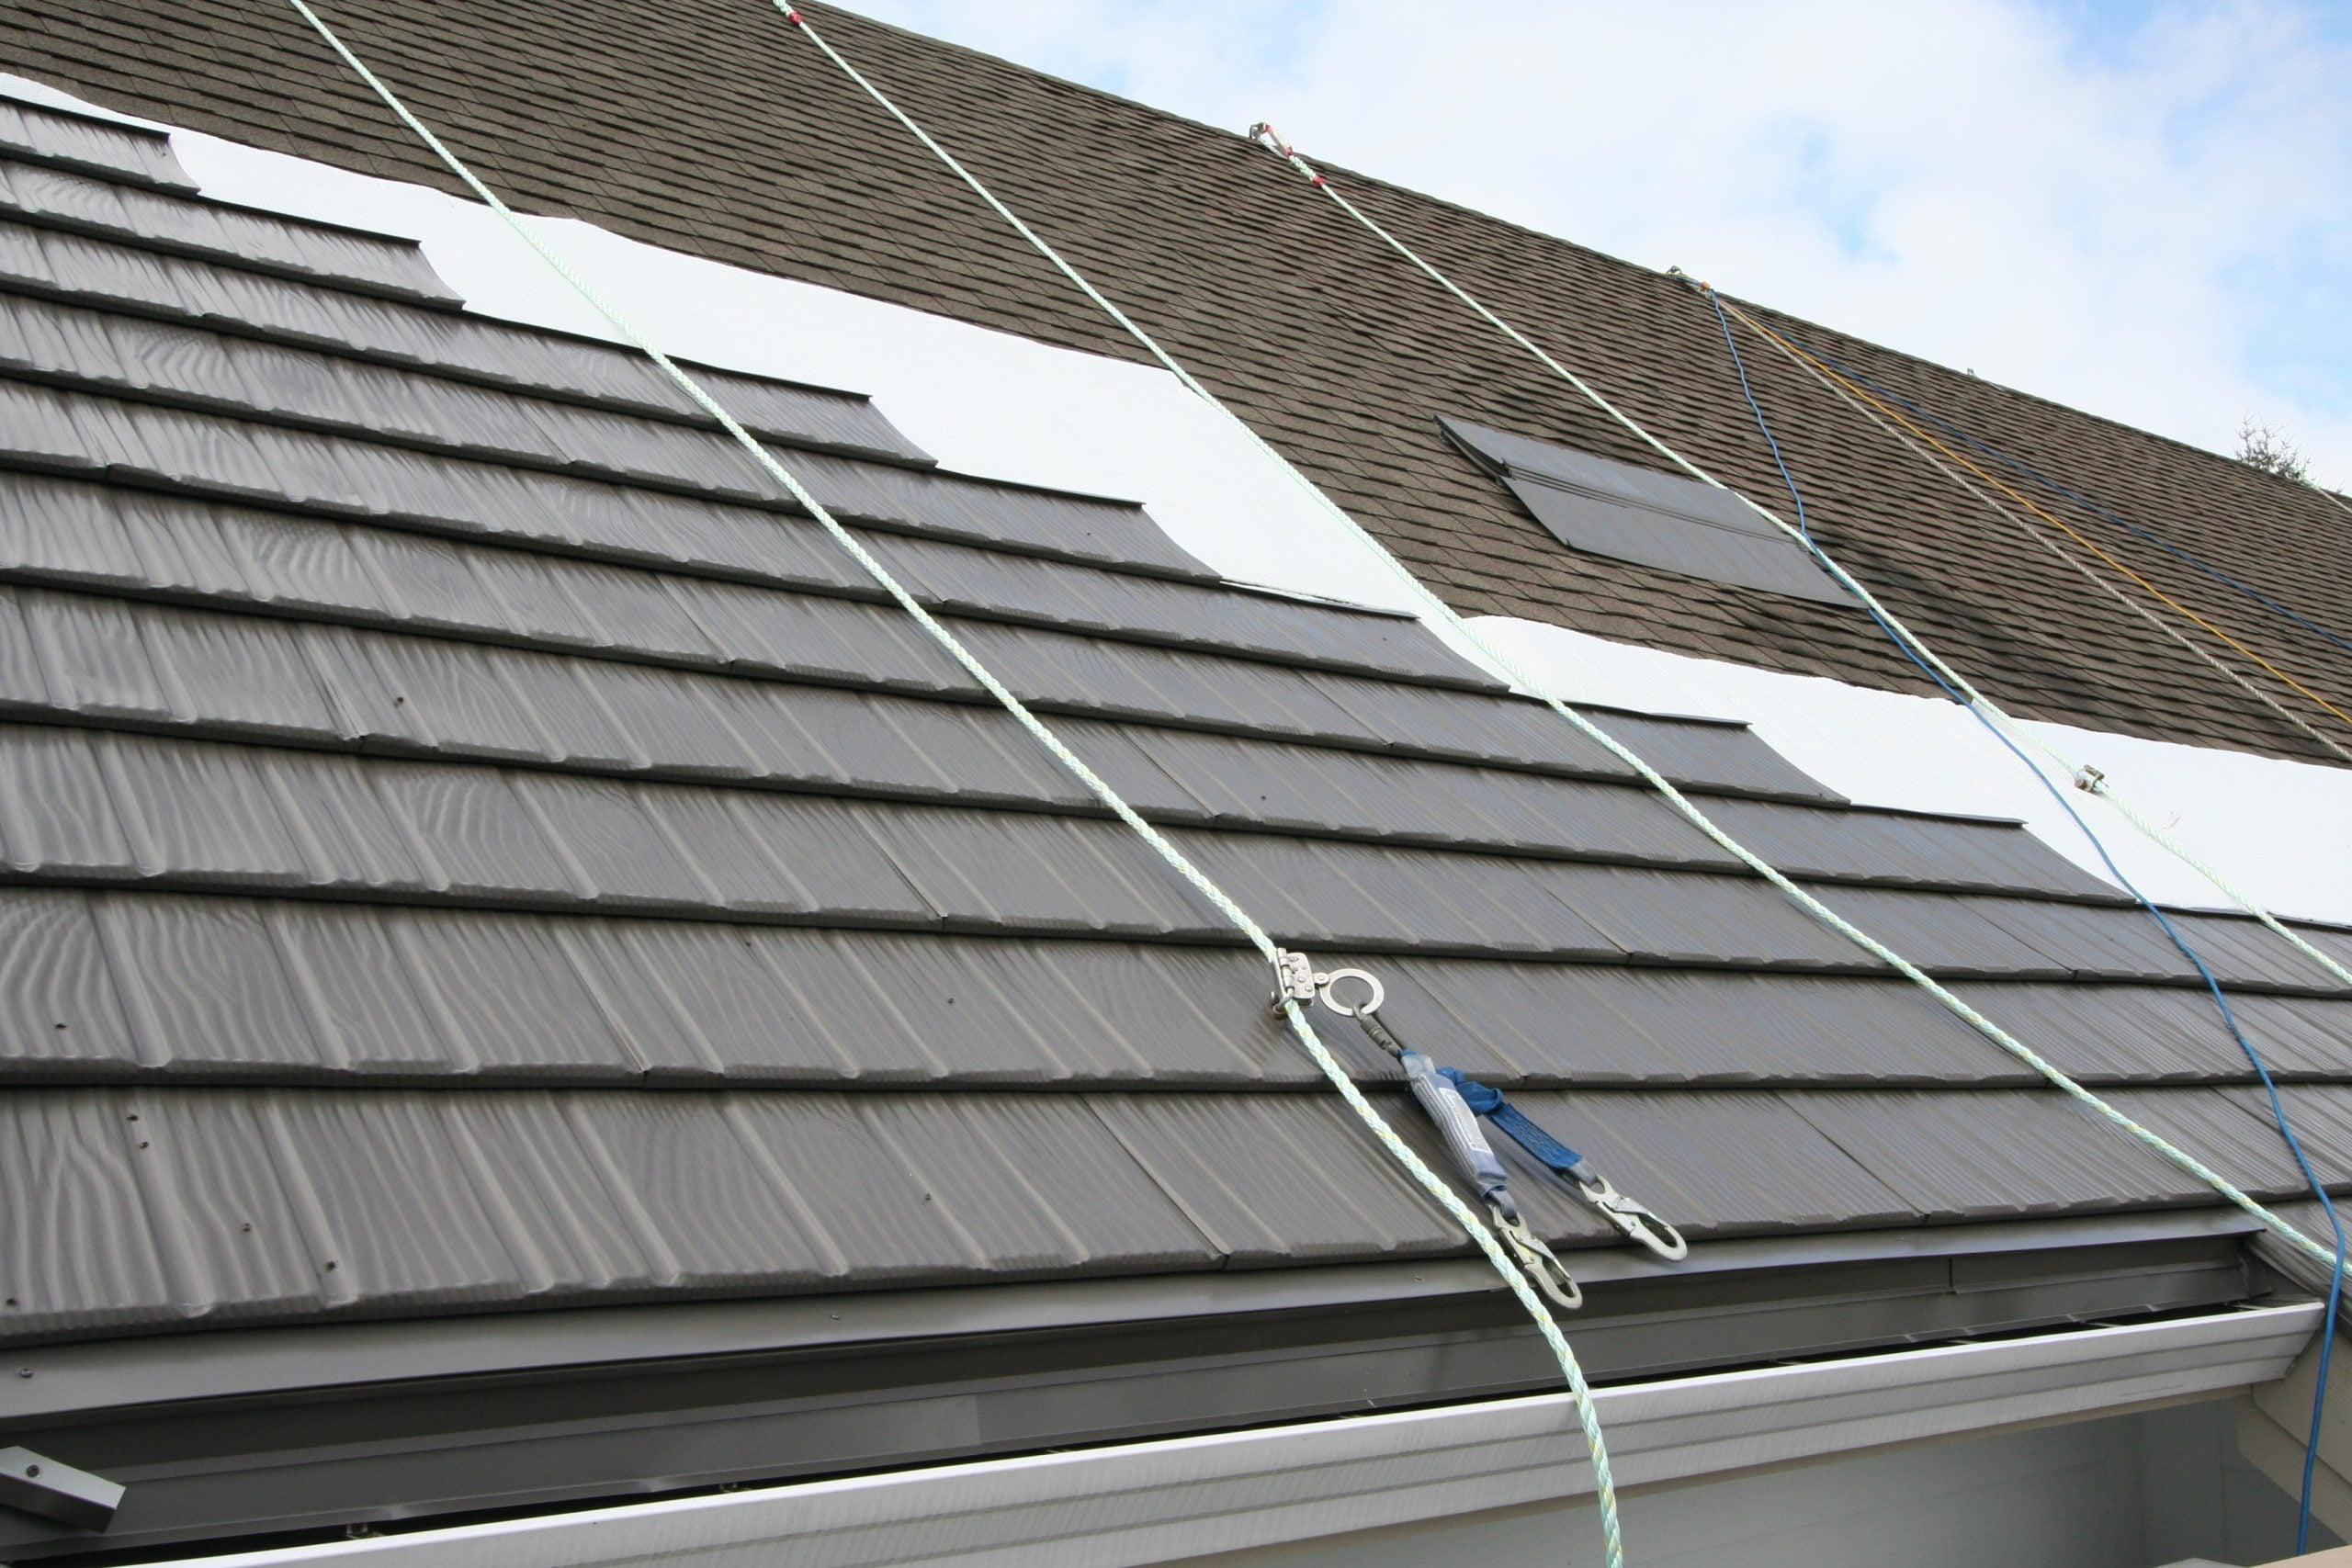 Putting Steel Roof Over Shingles – A Durable Roofing Upgrade